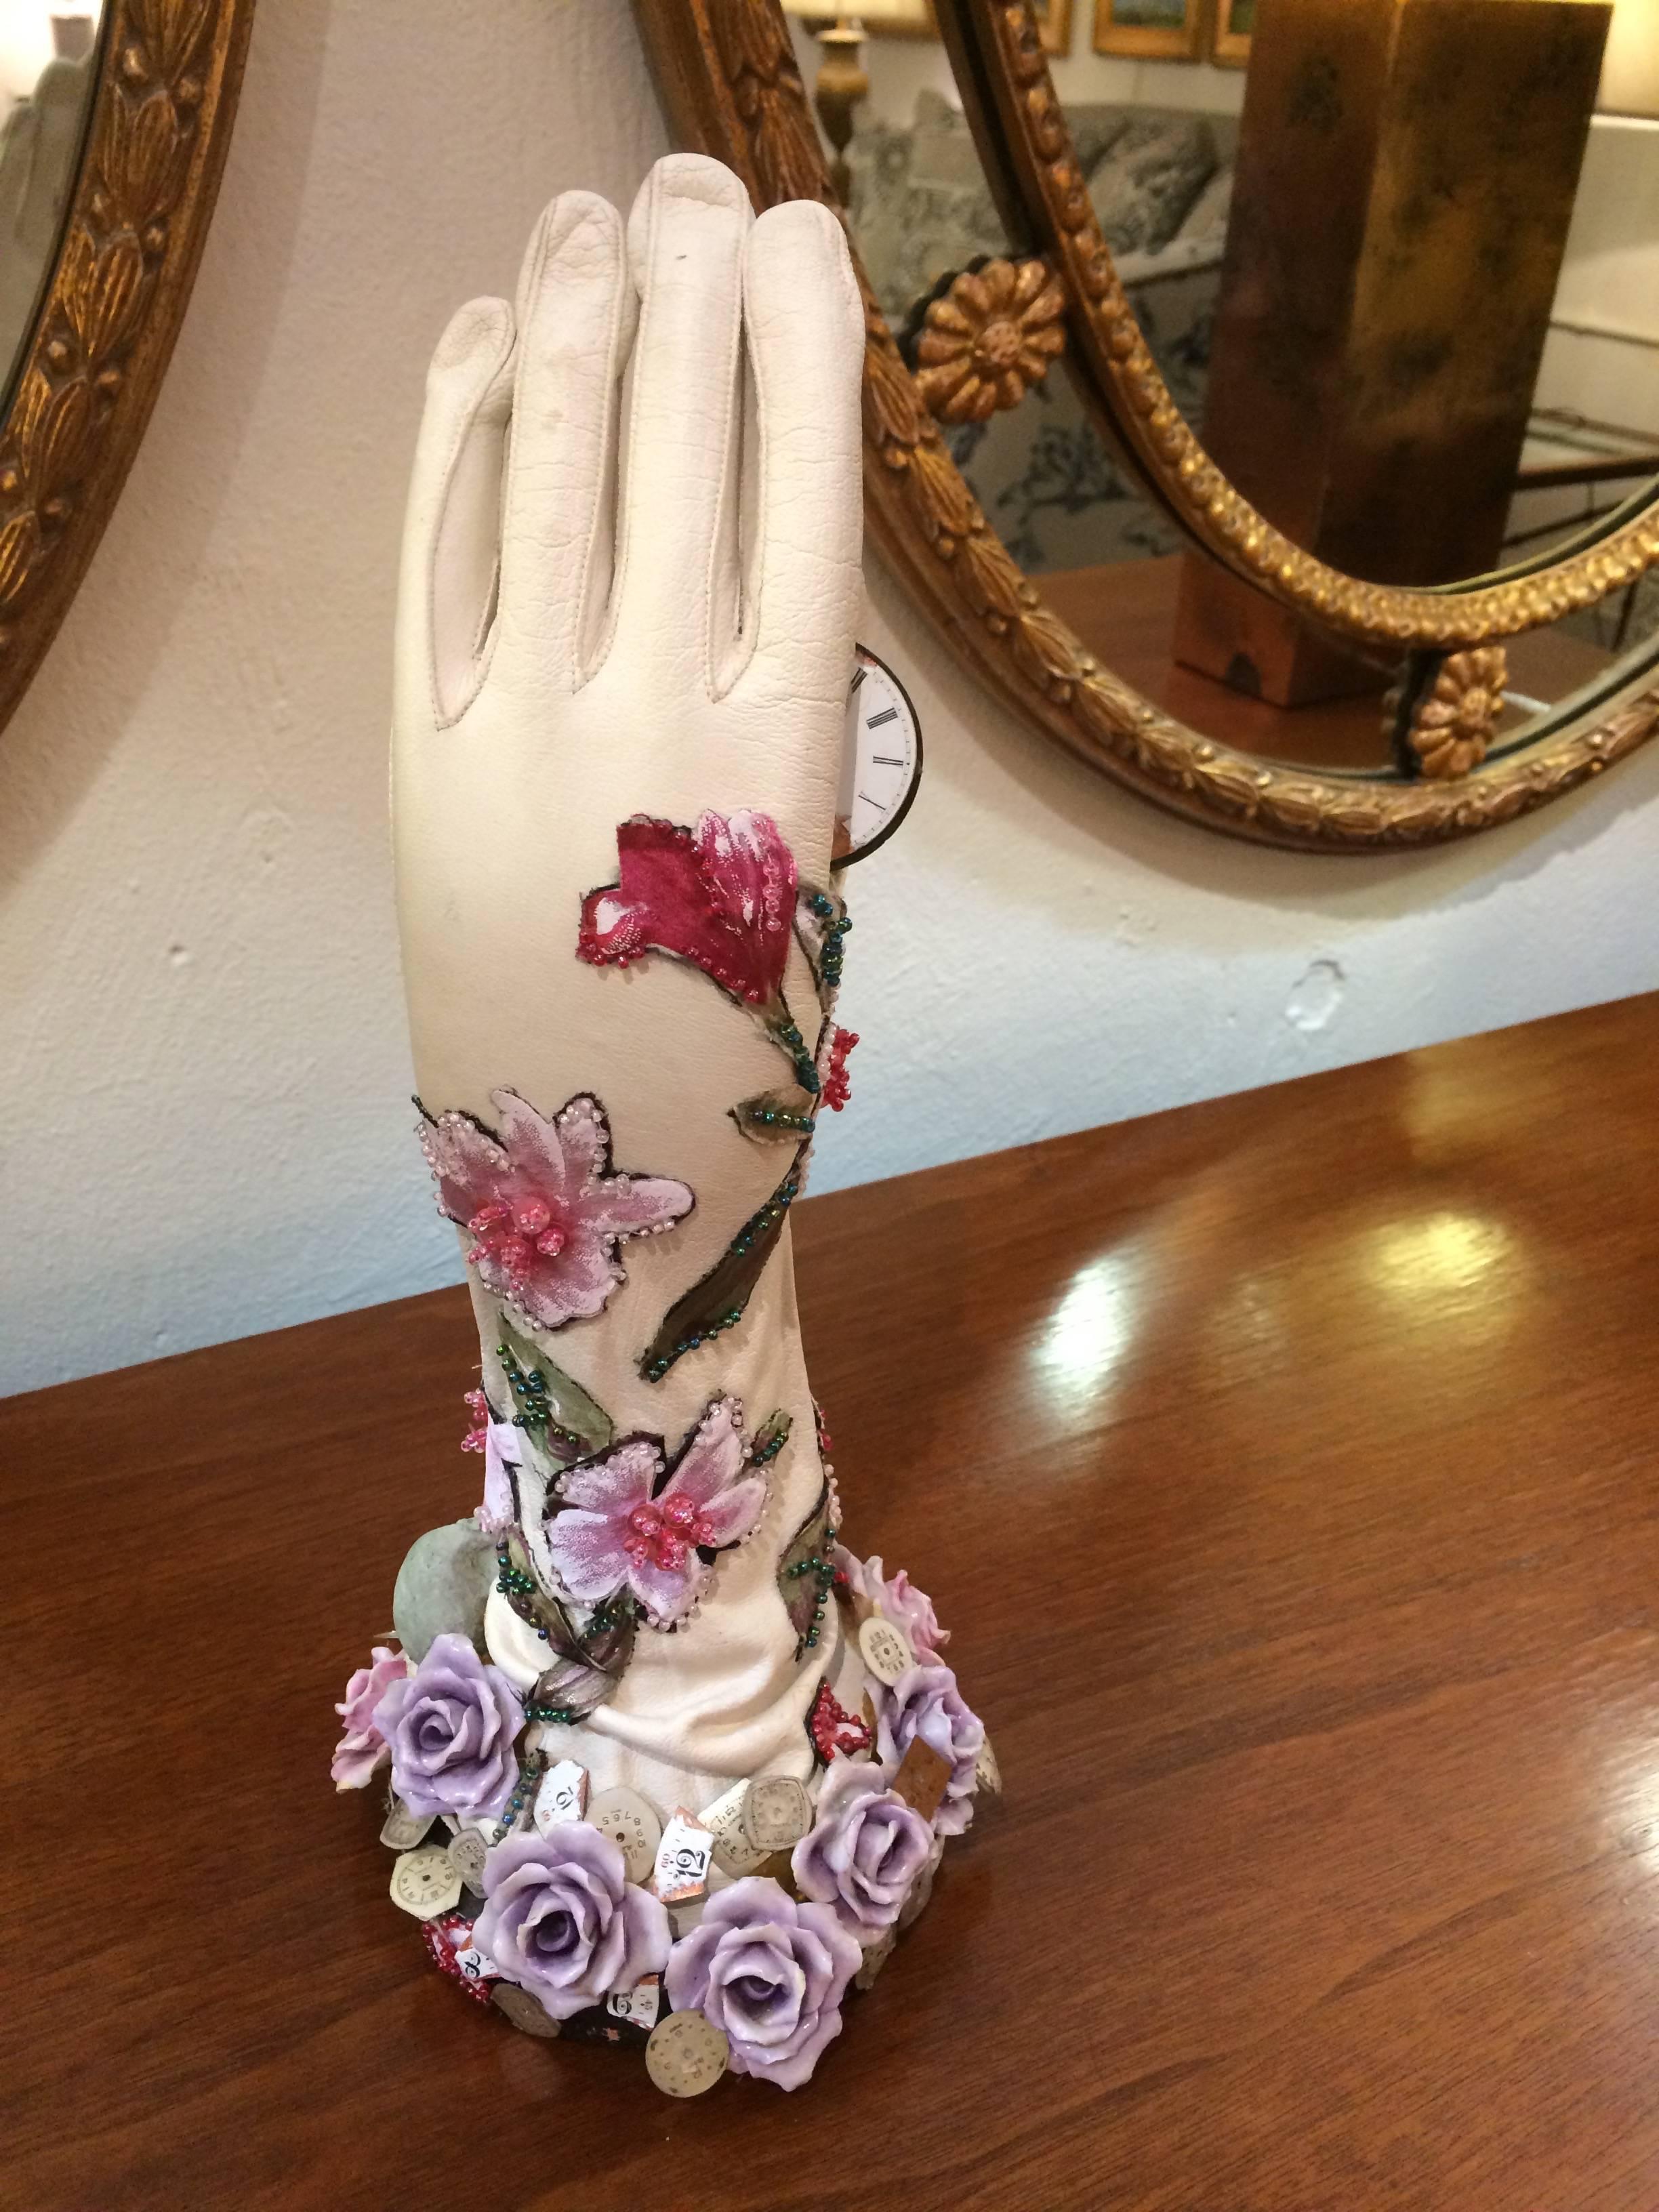 Mixed-media thoughtful assemblage sculpture of a leather gloved hand embellished with porcelain flowers, floral beaded adornments, and skull, provocatively holding a pink clock face suggesting the passage of time.